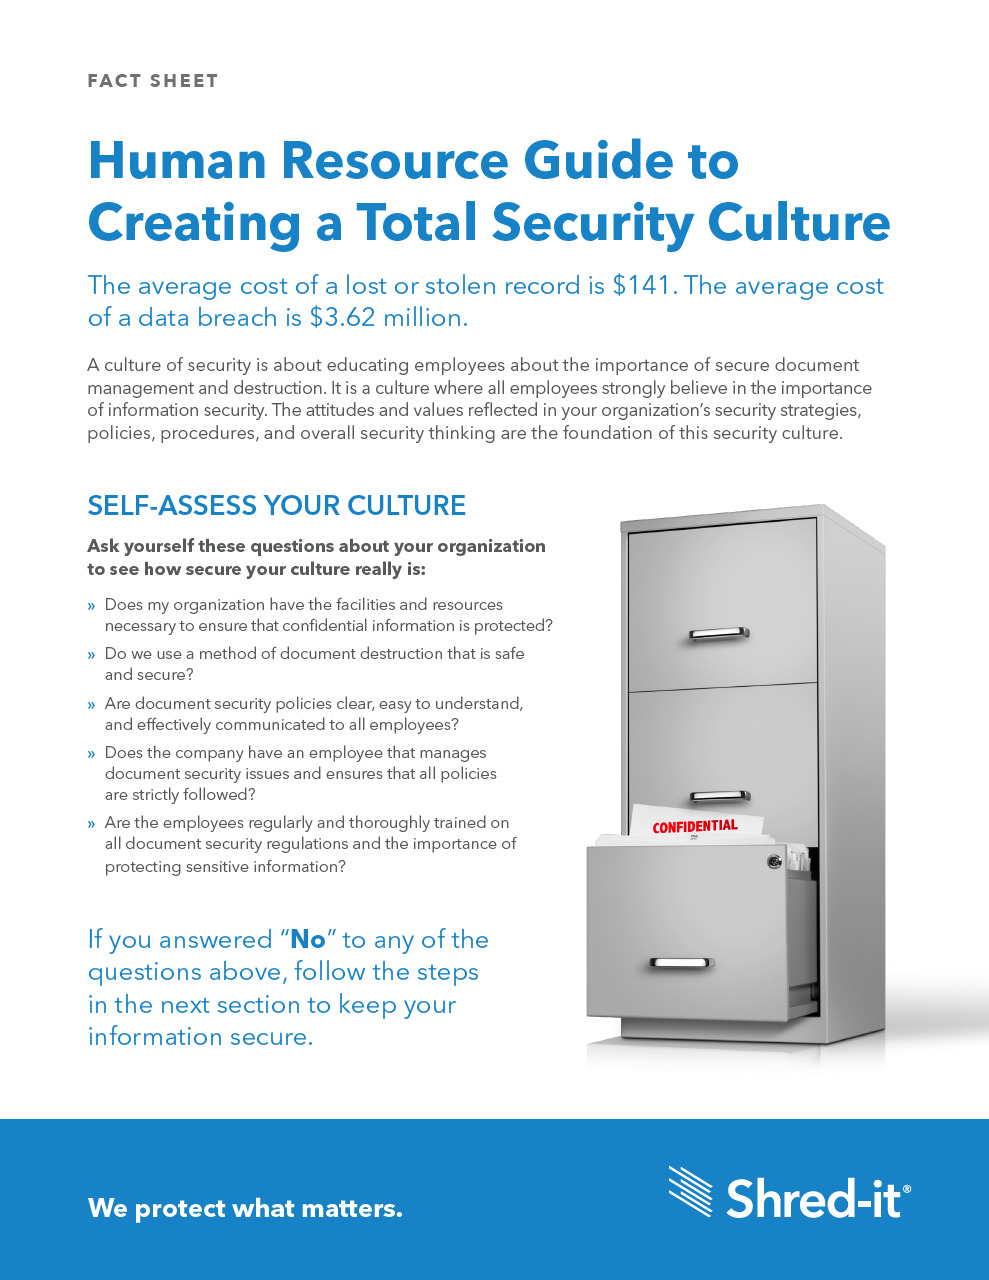 Shred-it-Total-Security-Culture-Fact-Sheet-USA.pdf